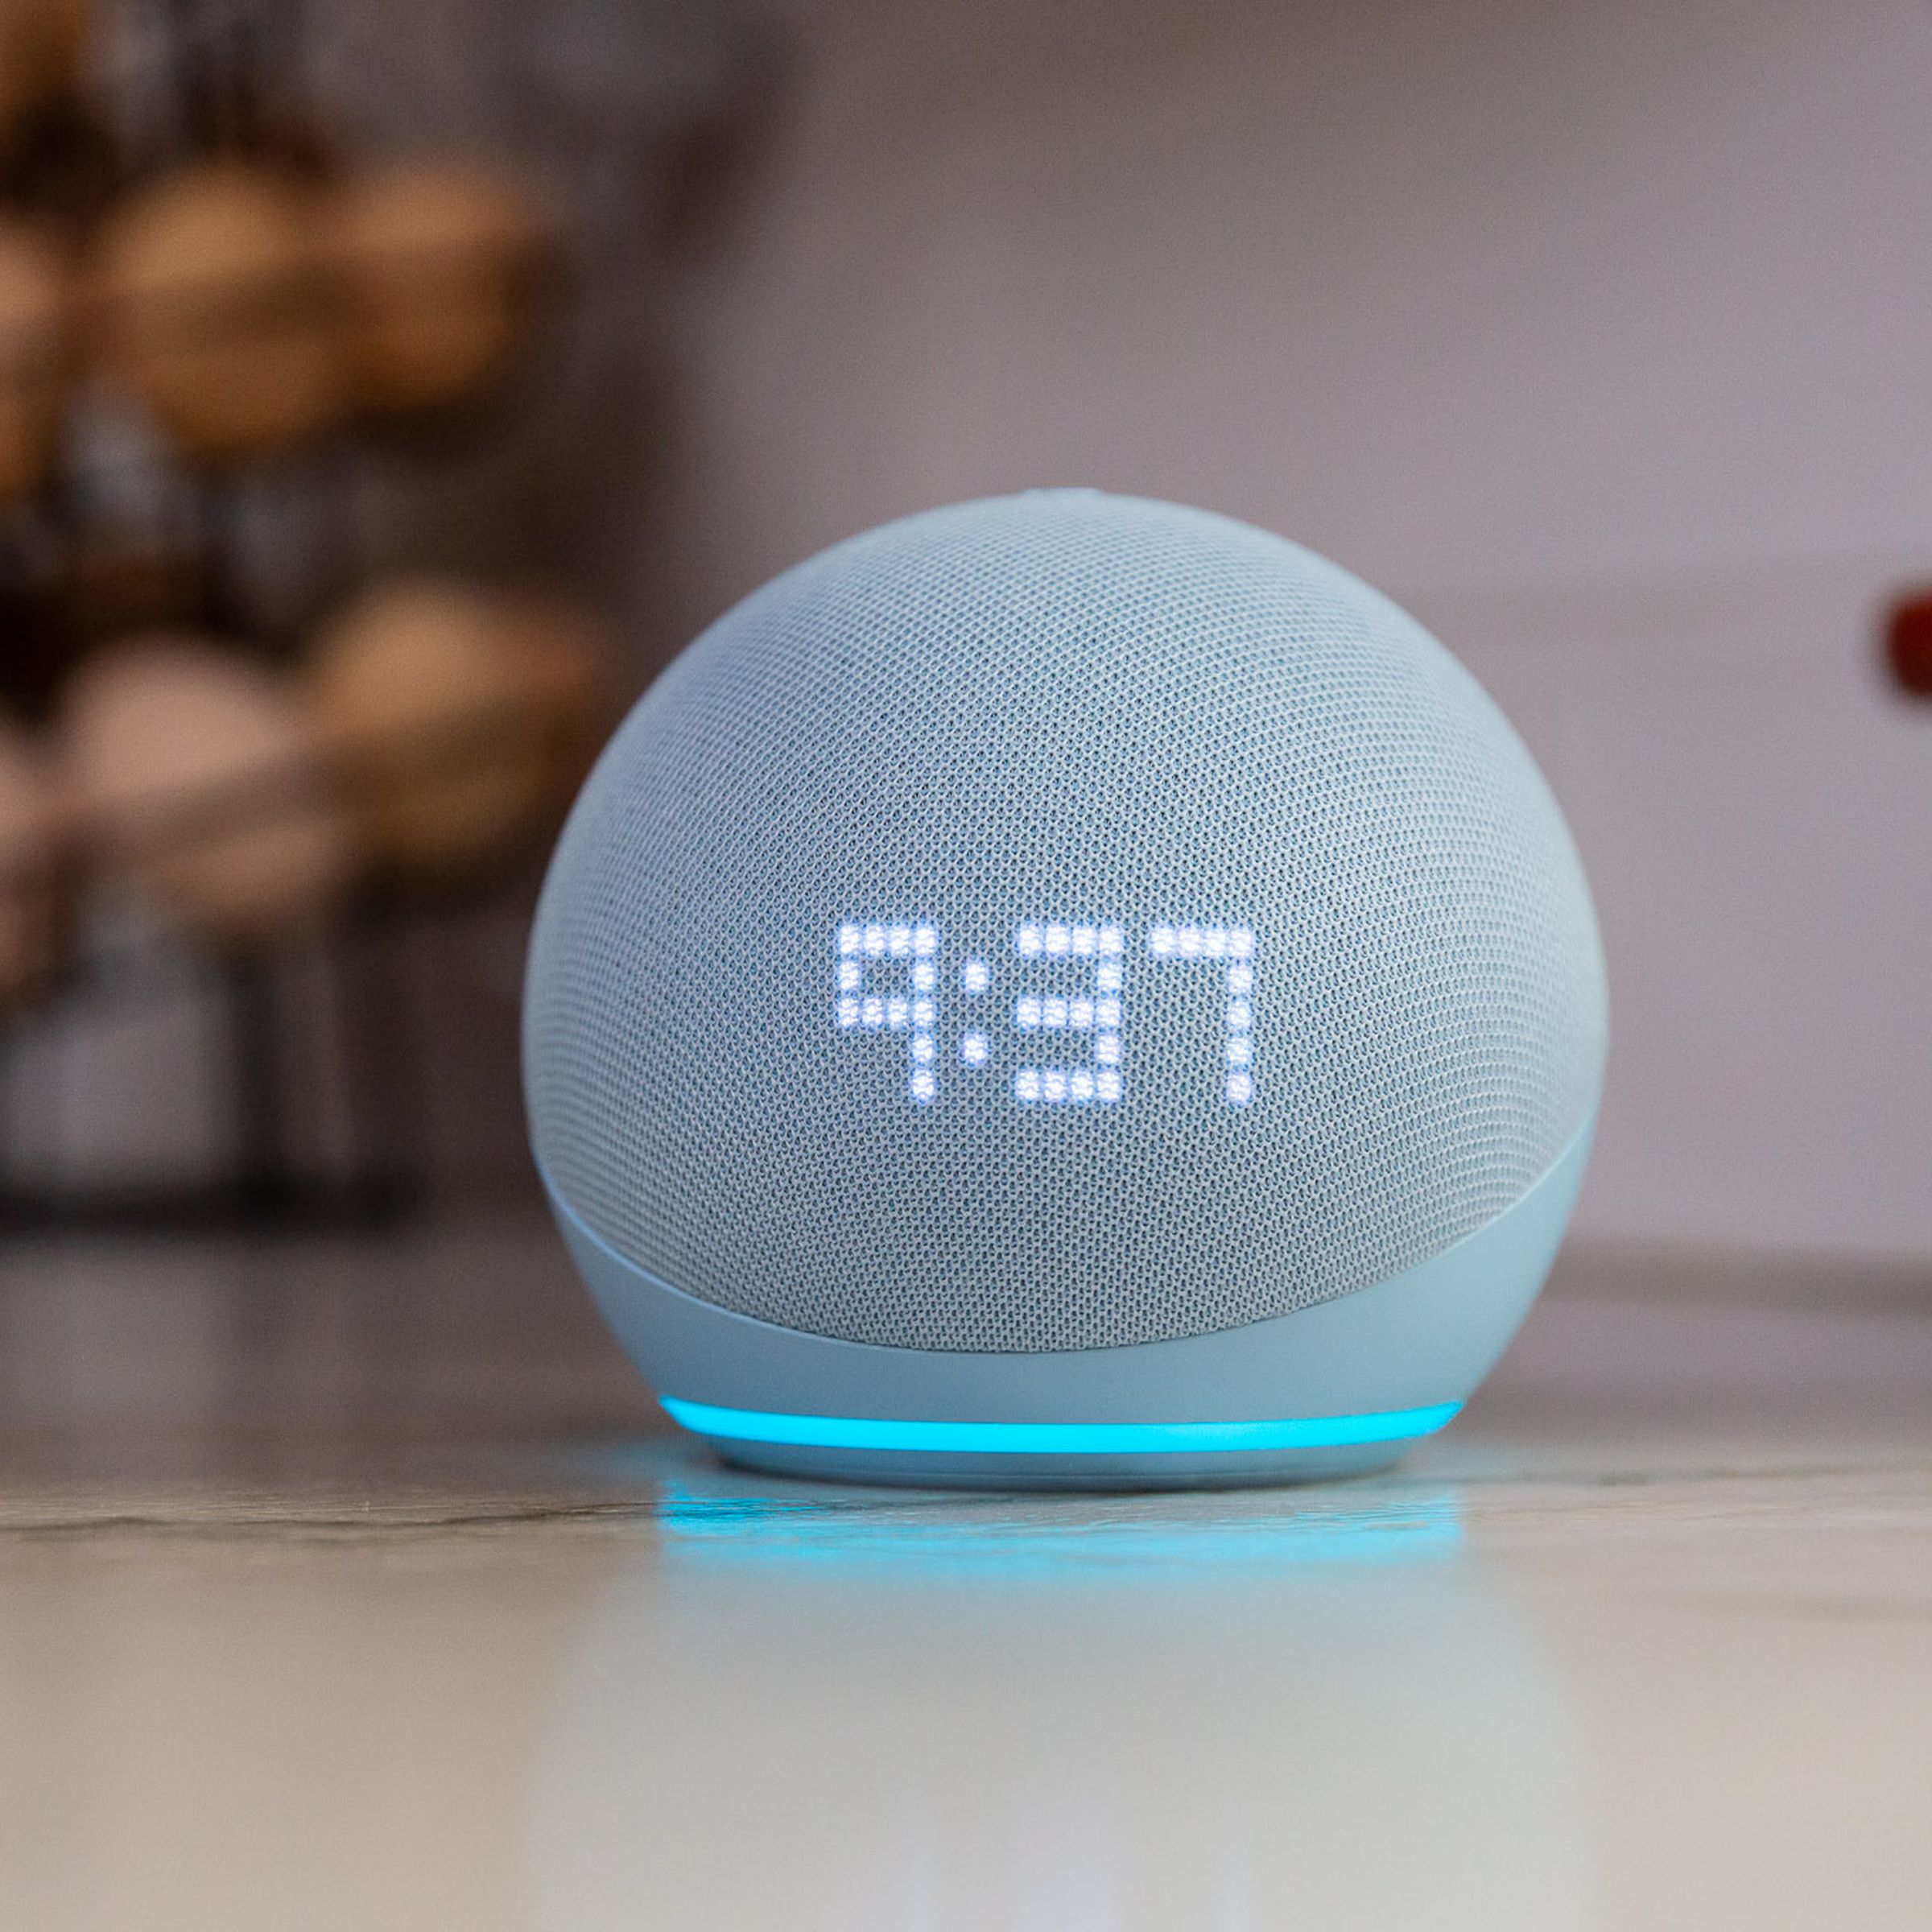 You can already buy the latest clock-equipped Echo Dot for $44.99 ($15 off).